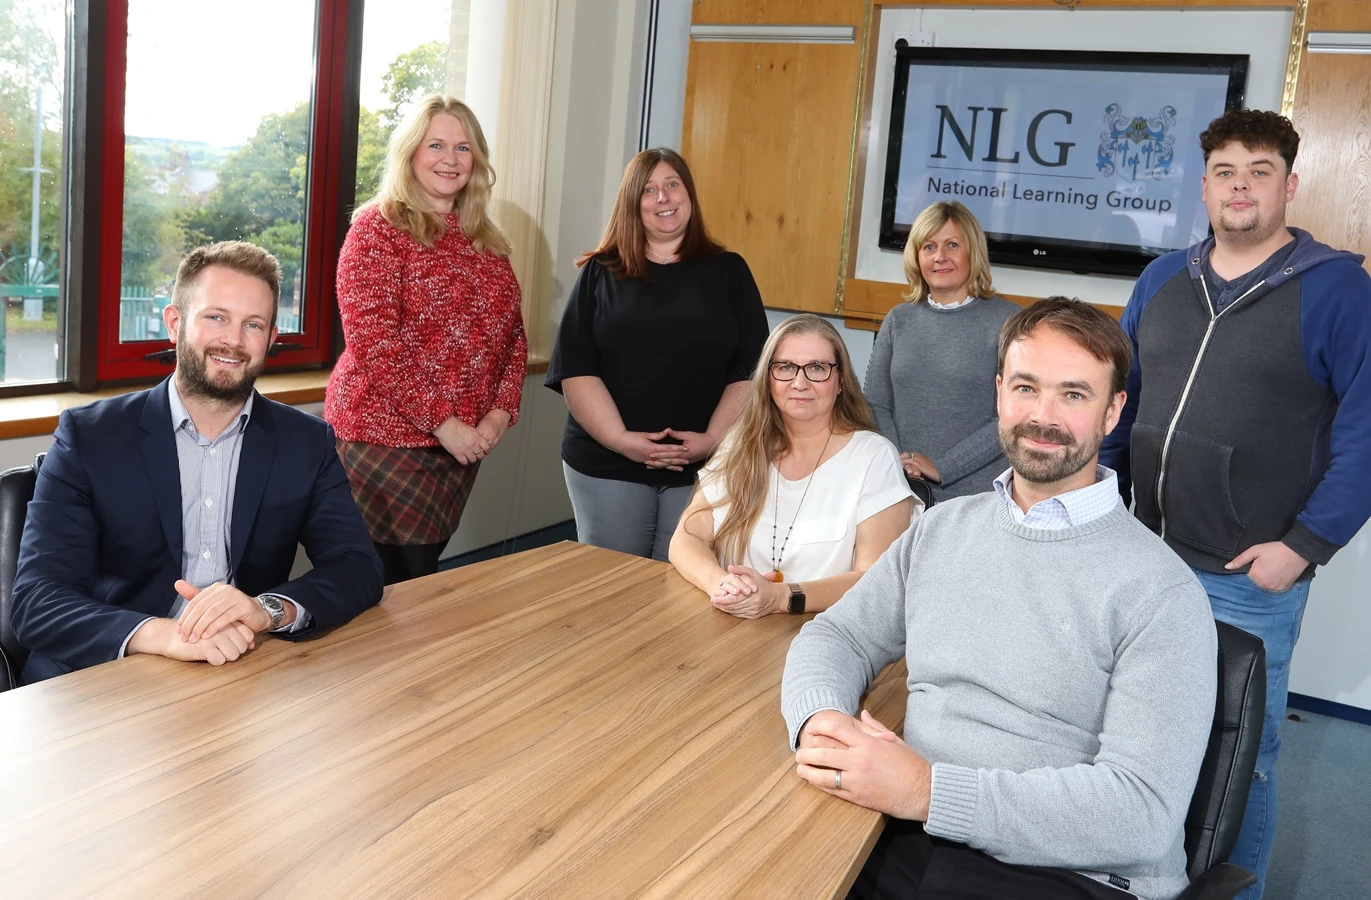 The team at National Learning Group